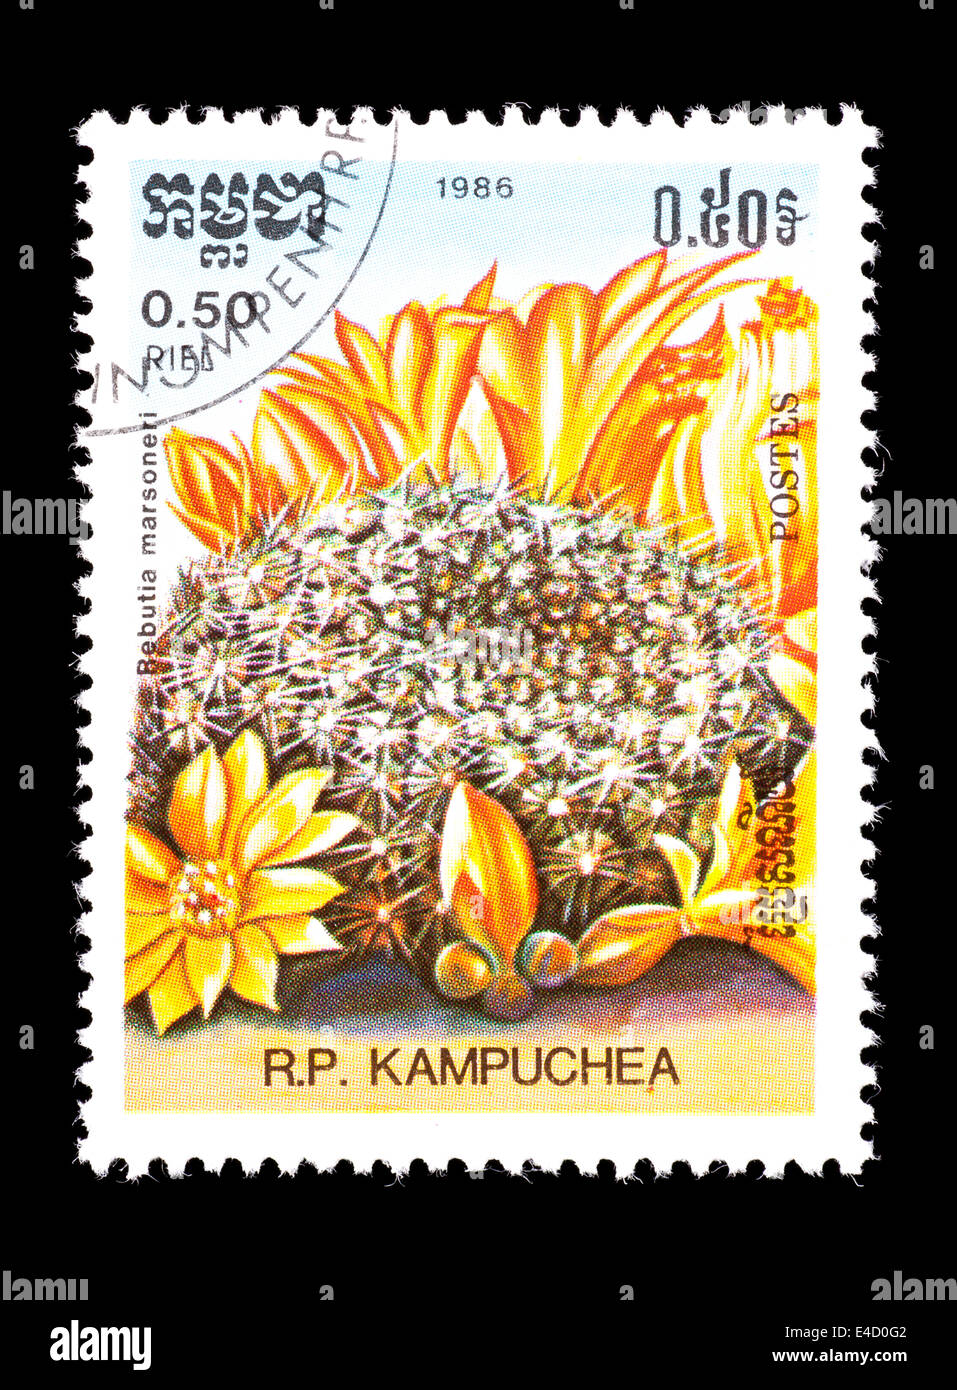 Postage stamp from Kampuchea (Cambodia) depicting a crown cactus in bloom (Rebutia marsoneri) Stock Photo